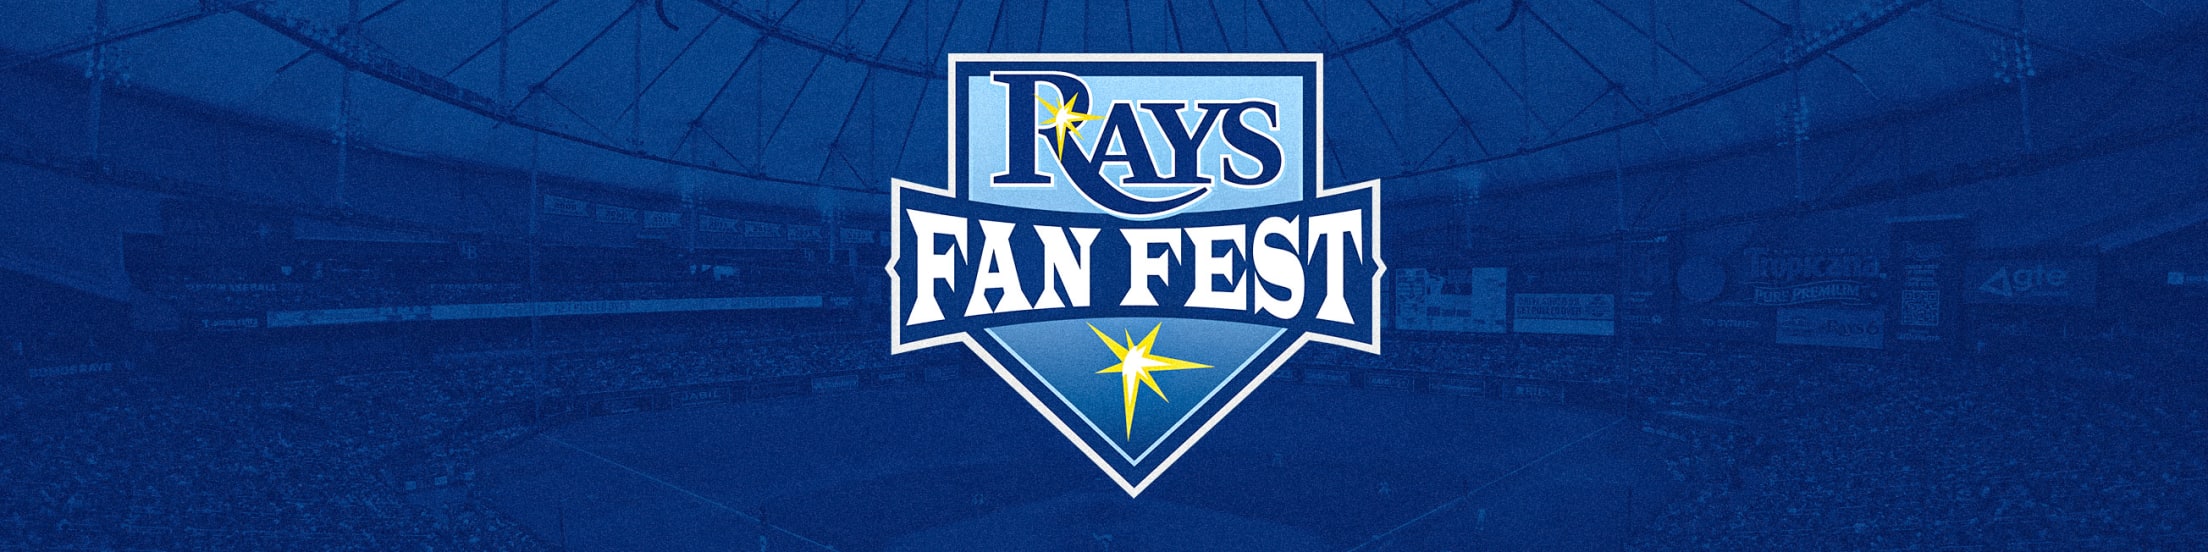 No Fan Fest for the Rays this year, but there are promotions to check out